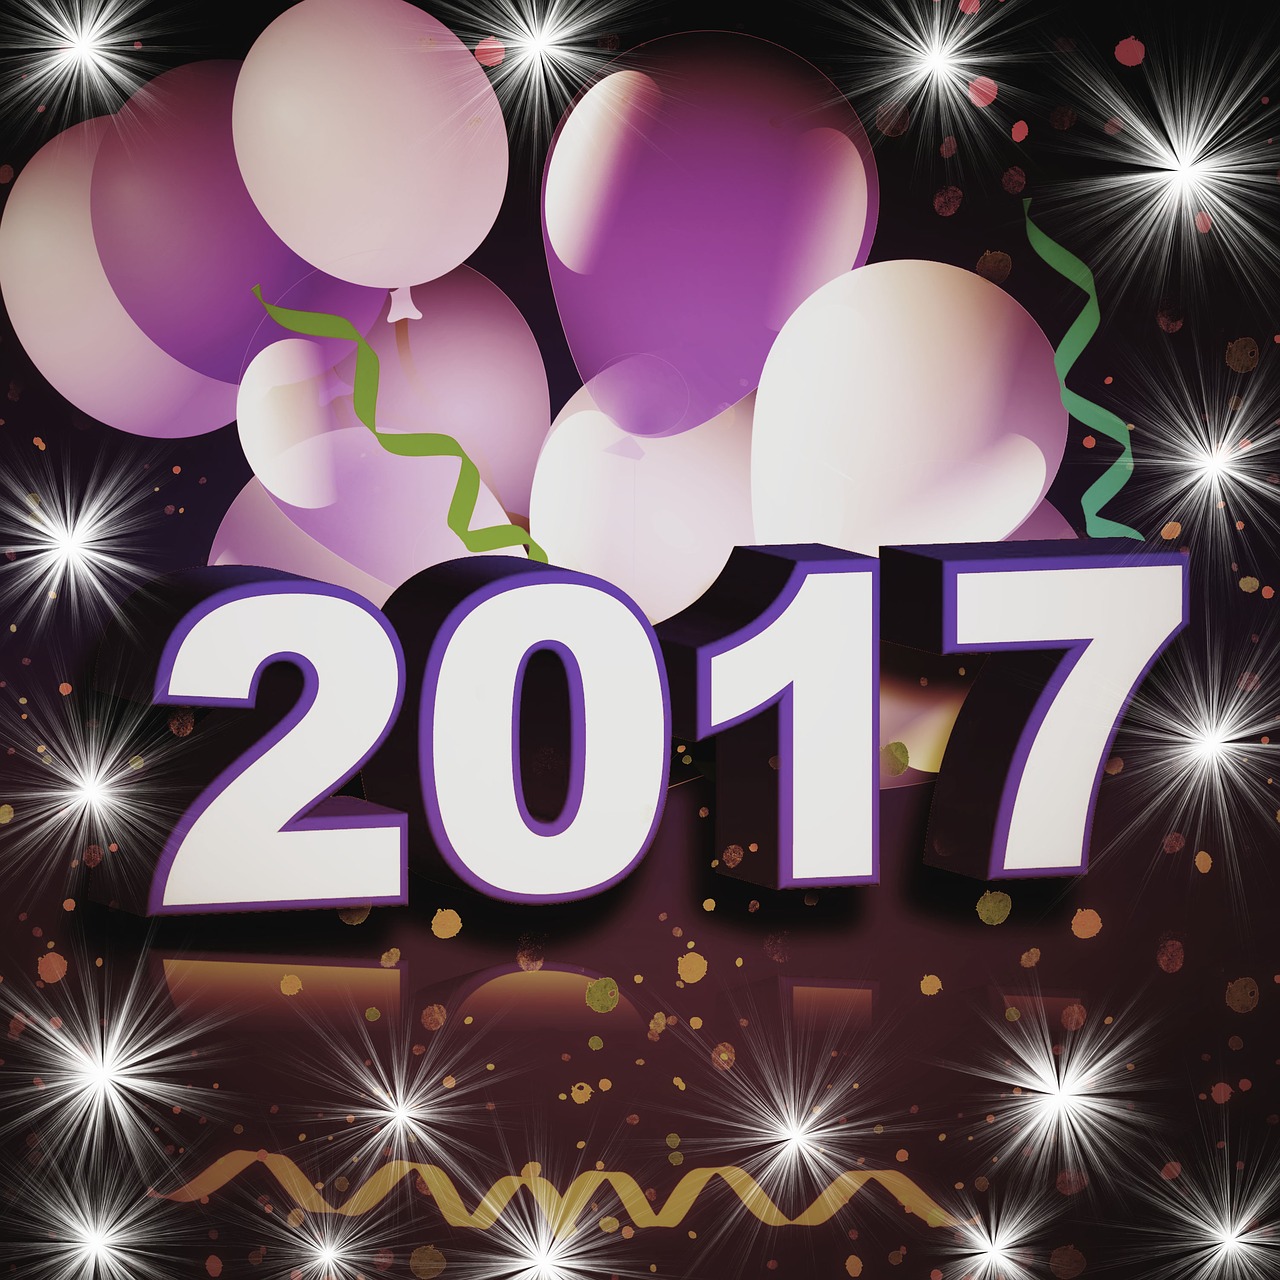 new year's eve 2017 balloons free photo